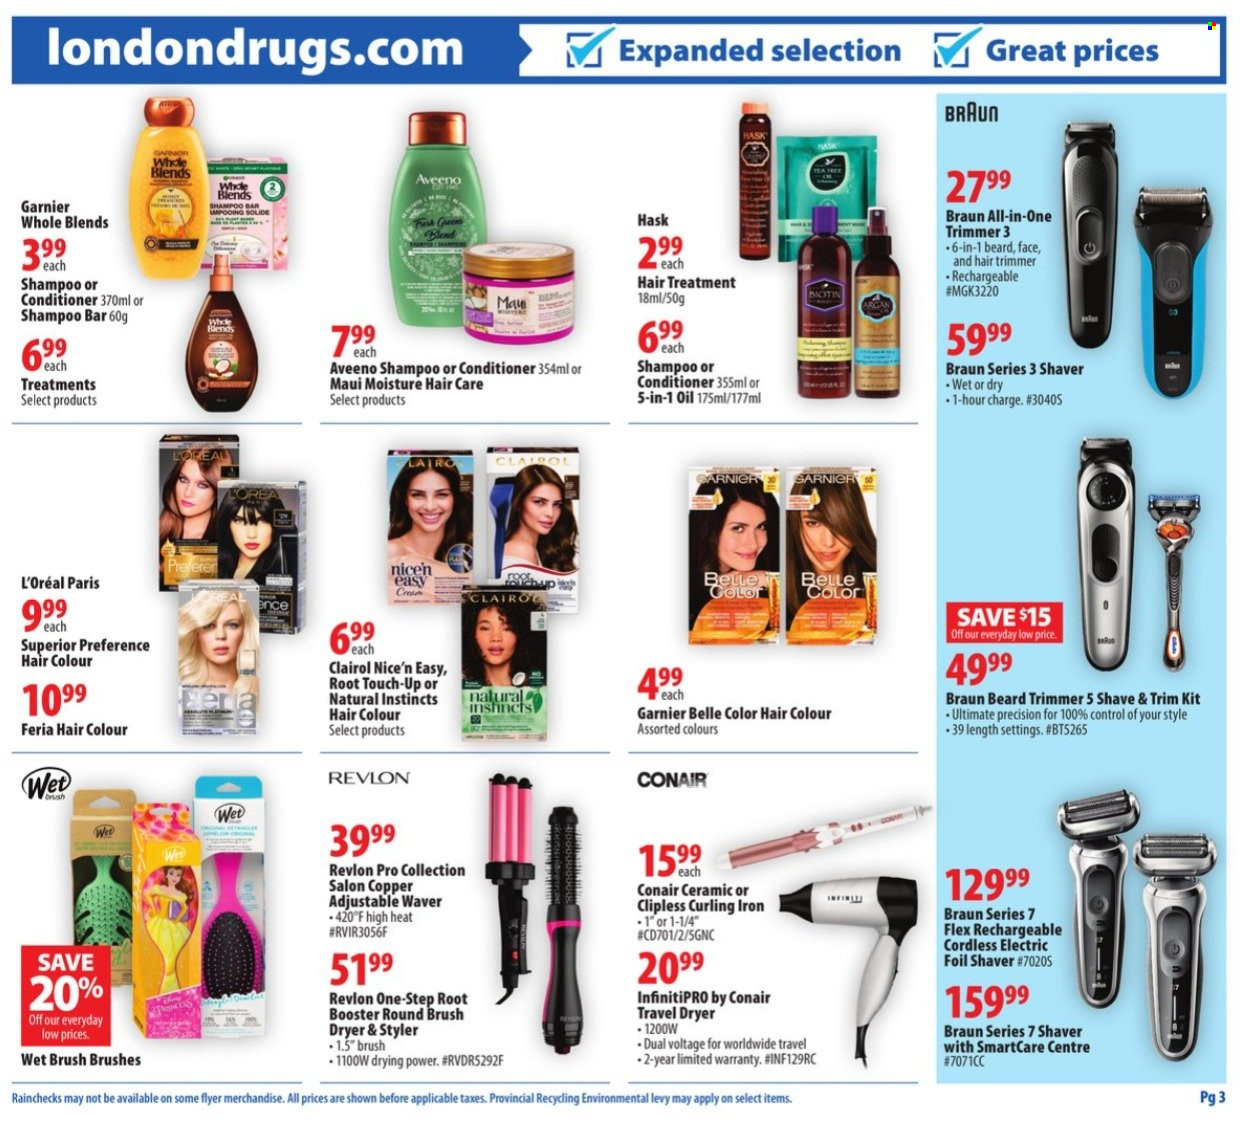 thumbnail - London Drugs Flyer - May 19, 2022 - May 25, 2022 - Sales products - oil, Aveeno, L’Oréal, Root Touch-Up, Clairol, conditioner, Revlon, hair color, Hask, Maui Moisture, shaver, trimmer, brush, iron, curling iron, Biotin, Braun, Garnier, shampoo. Page 3.